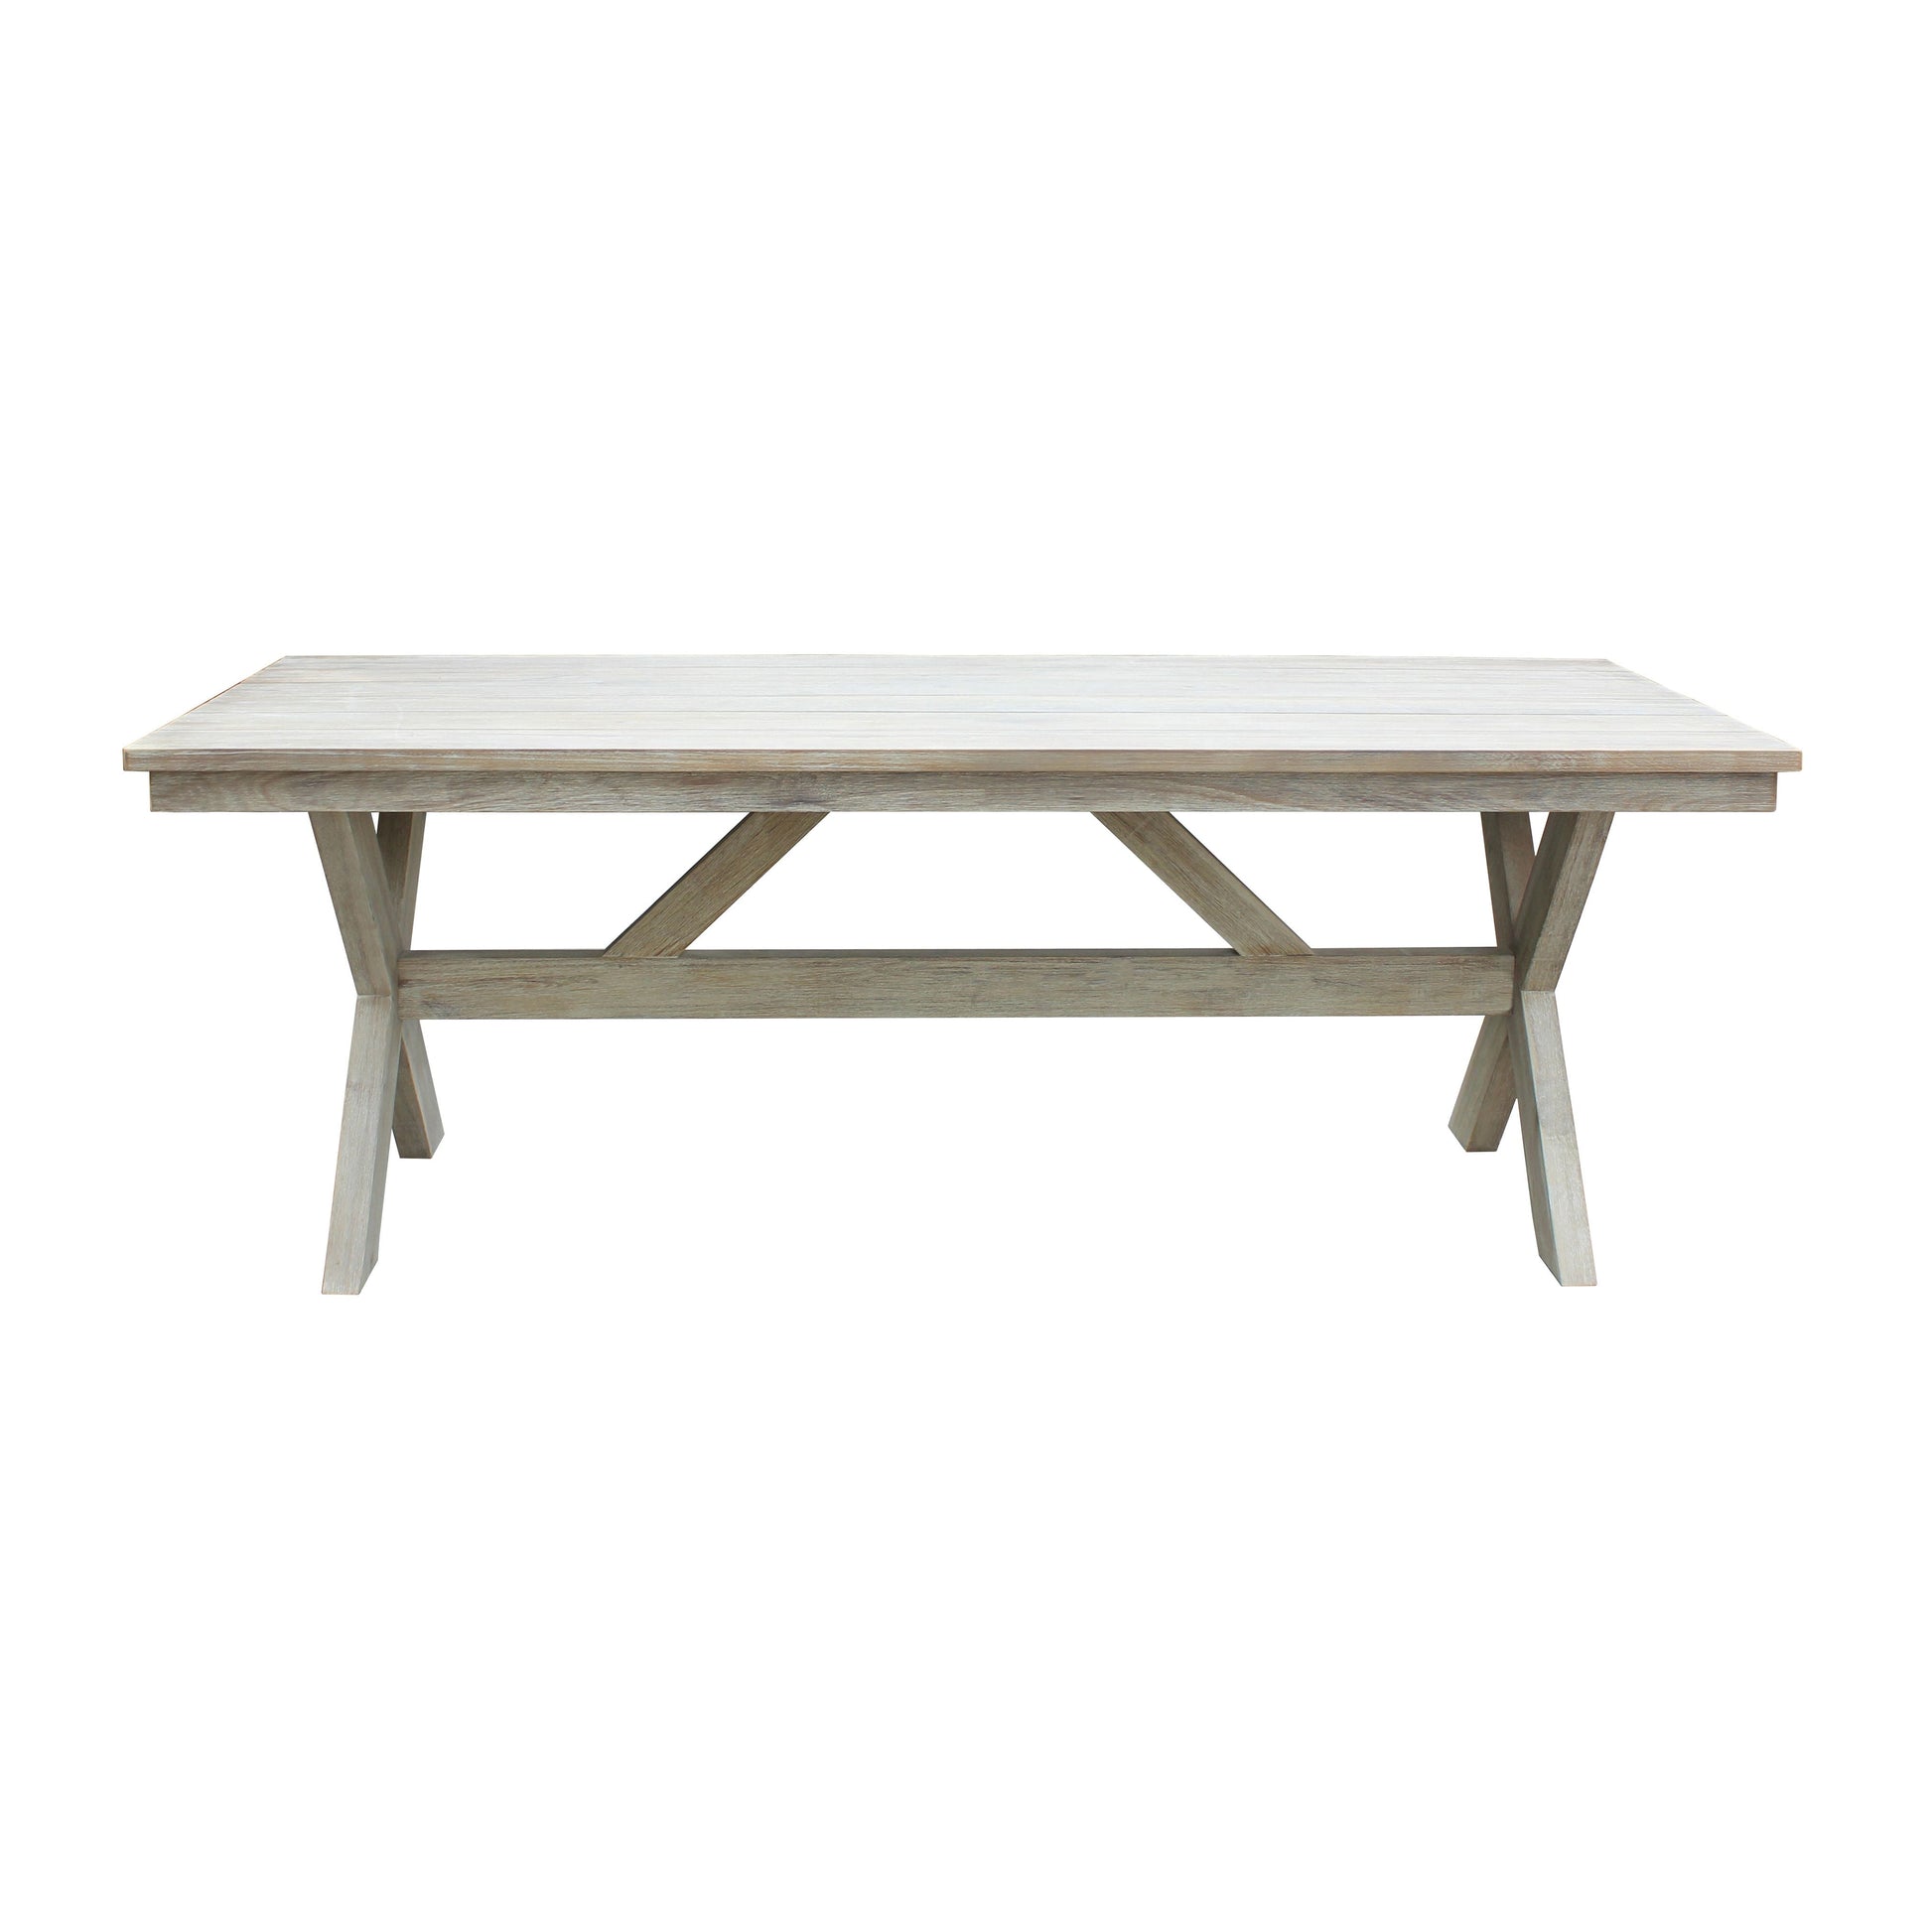 Santino 83 Inch Wood Dining Table 6